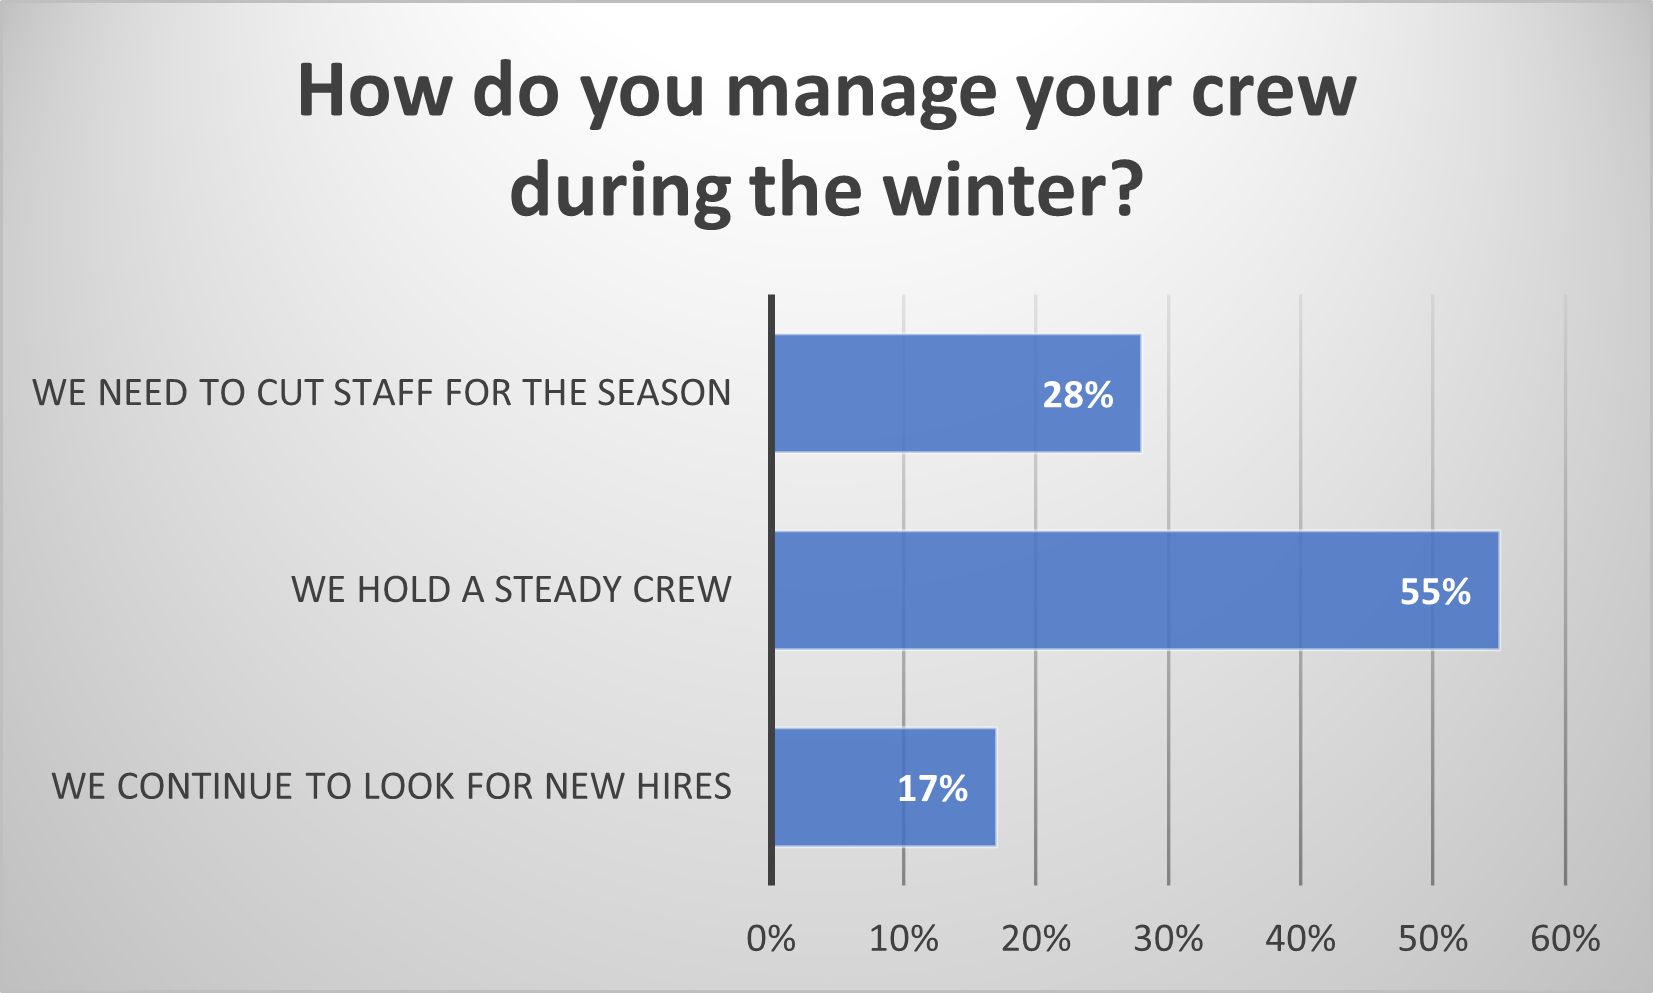 Manage crew during the winter